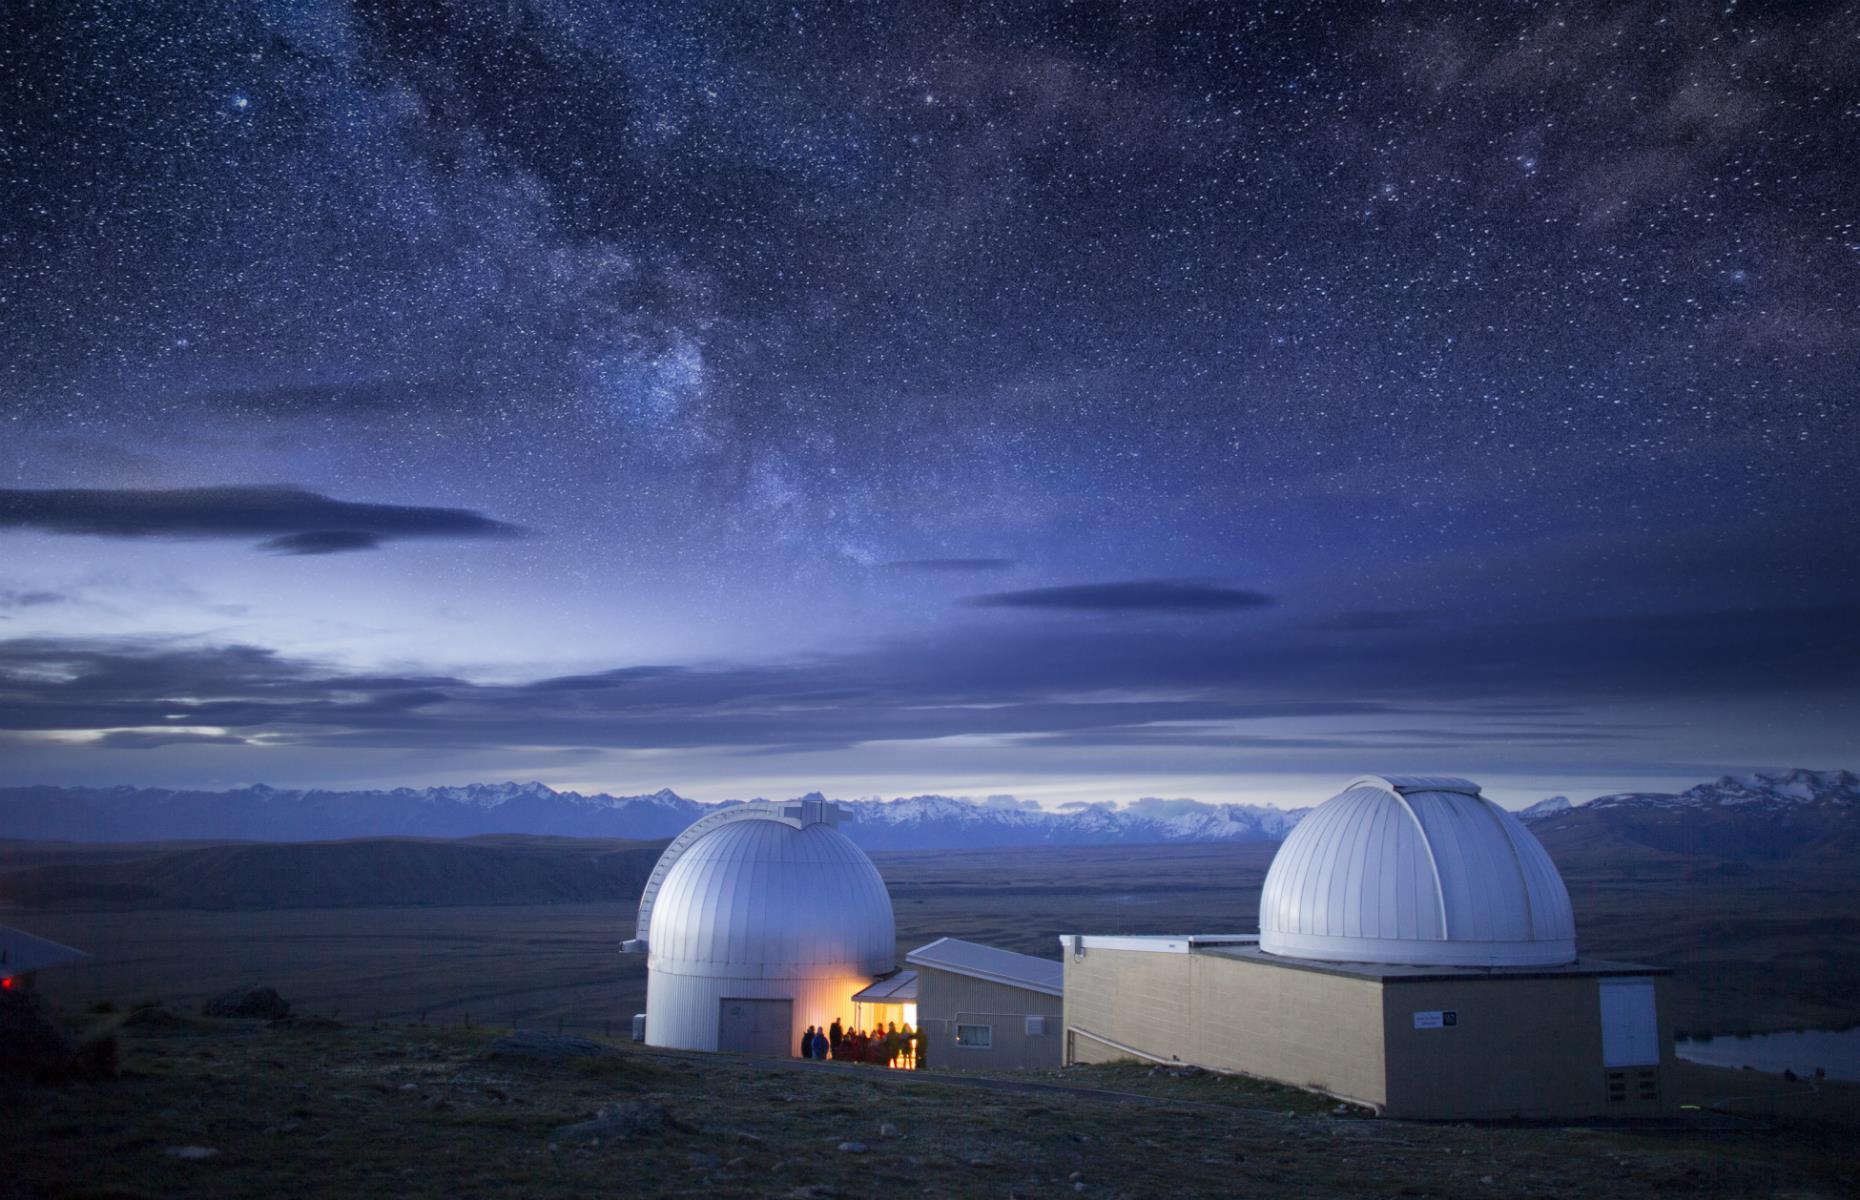 <p>For an invigorated sense of wonder at the galaxy, enjoy a night-time visit to the <a href="https://www.darkskyreserve.org.nz/">Aoraki-Mackenzie Dark-Sky Reserve</a>, which includes Canterbury University’s Mount John Observatory (pictured) above Lake Tekapo, or travel to the southernmost Dark Sky Sanctuary in the world on <a href="https://www.stewartisland.co.nz/dark-sky-sanctuary/">Stewart Island/Rakiura</a>. It's a truly magical experience.</p>